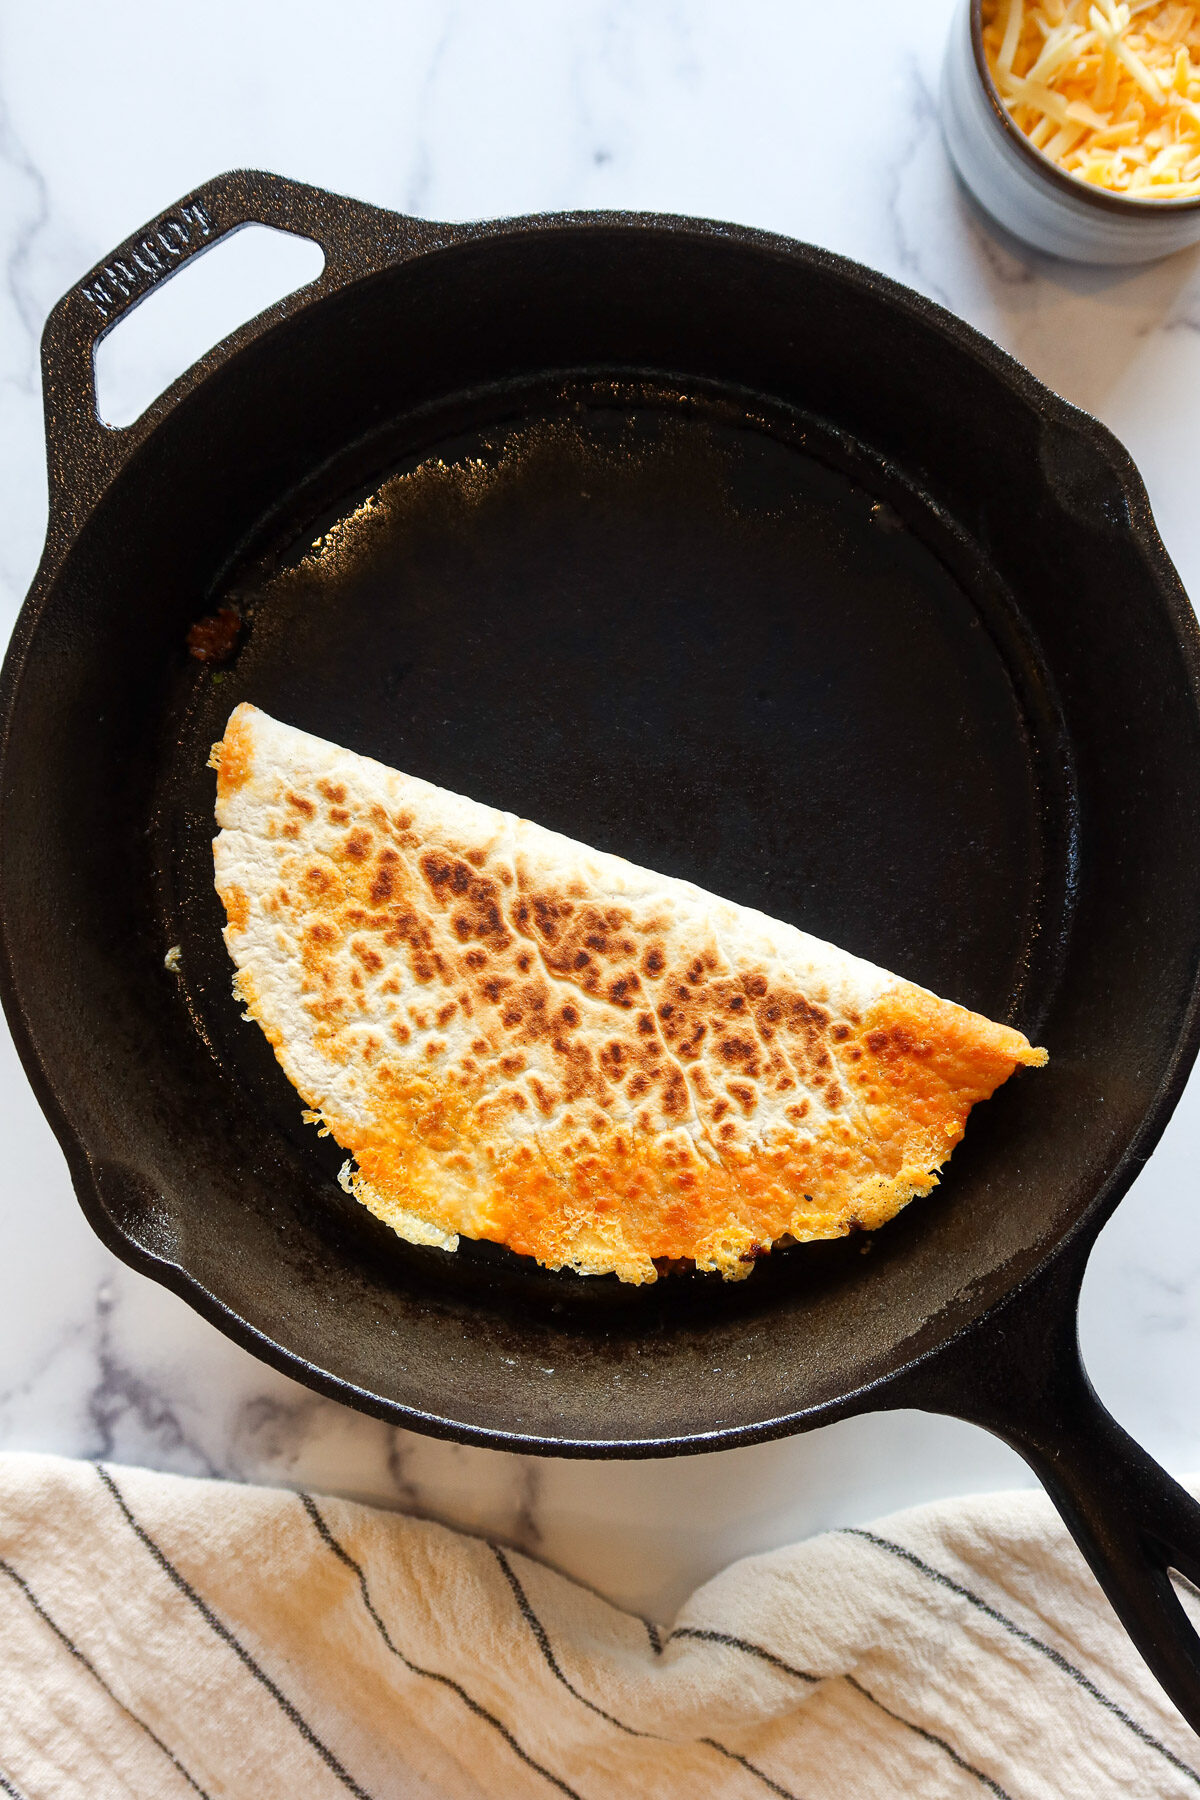 Cooking a quesadilla in a black cast iron pan.